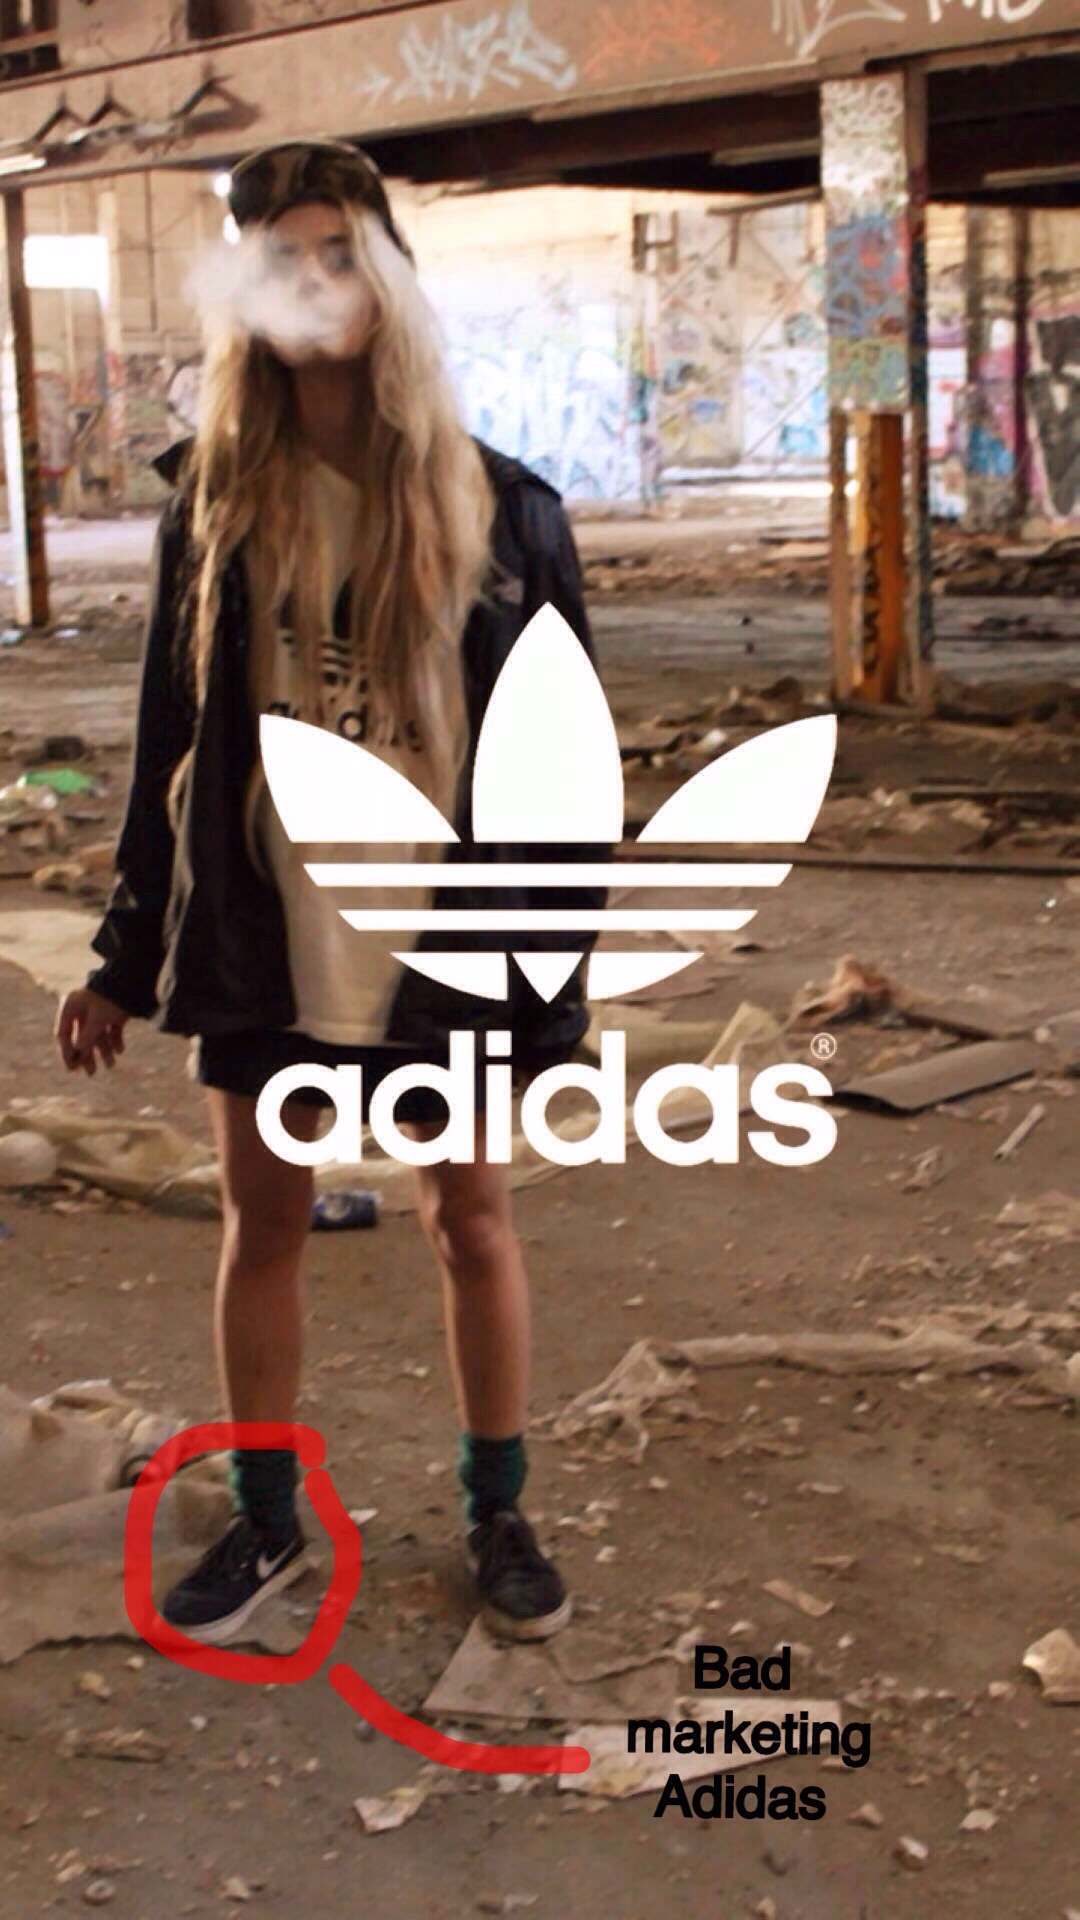 Too bad Adidas doesn't make shoes which they could have used - meme